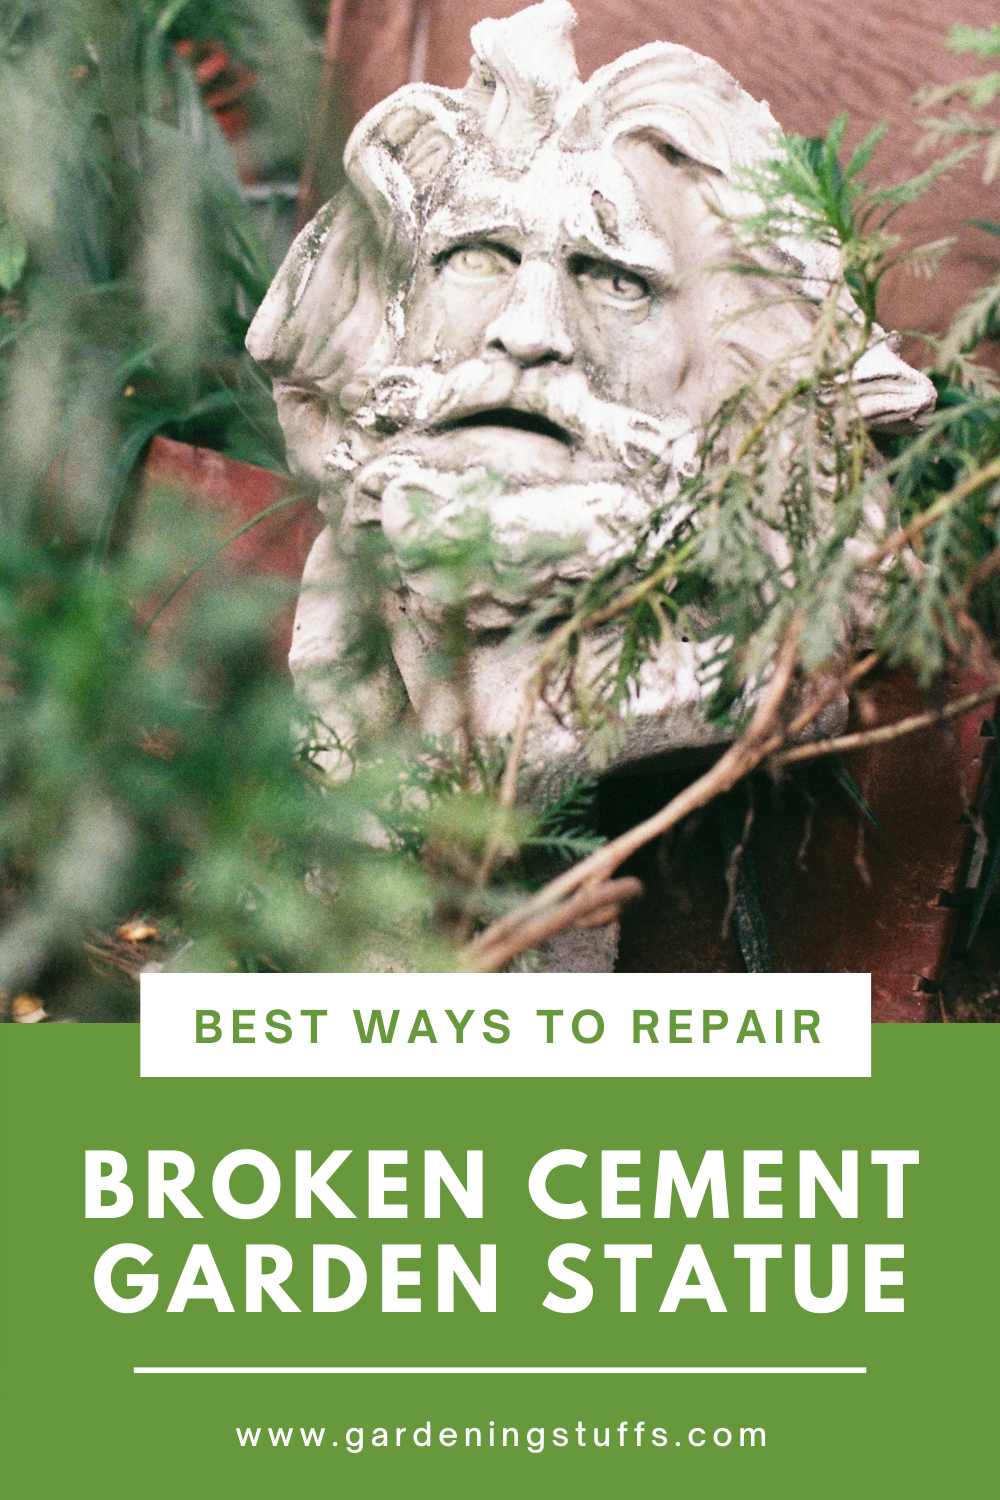 Do you know that you can repair your cement garden statues and this saves you from purchasing a new one? Check out this article, we have listed the easy steps that you need to follow to repair a broken cement garden statue.